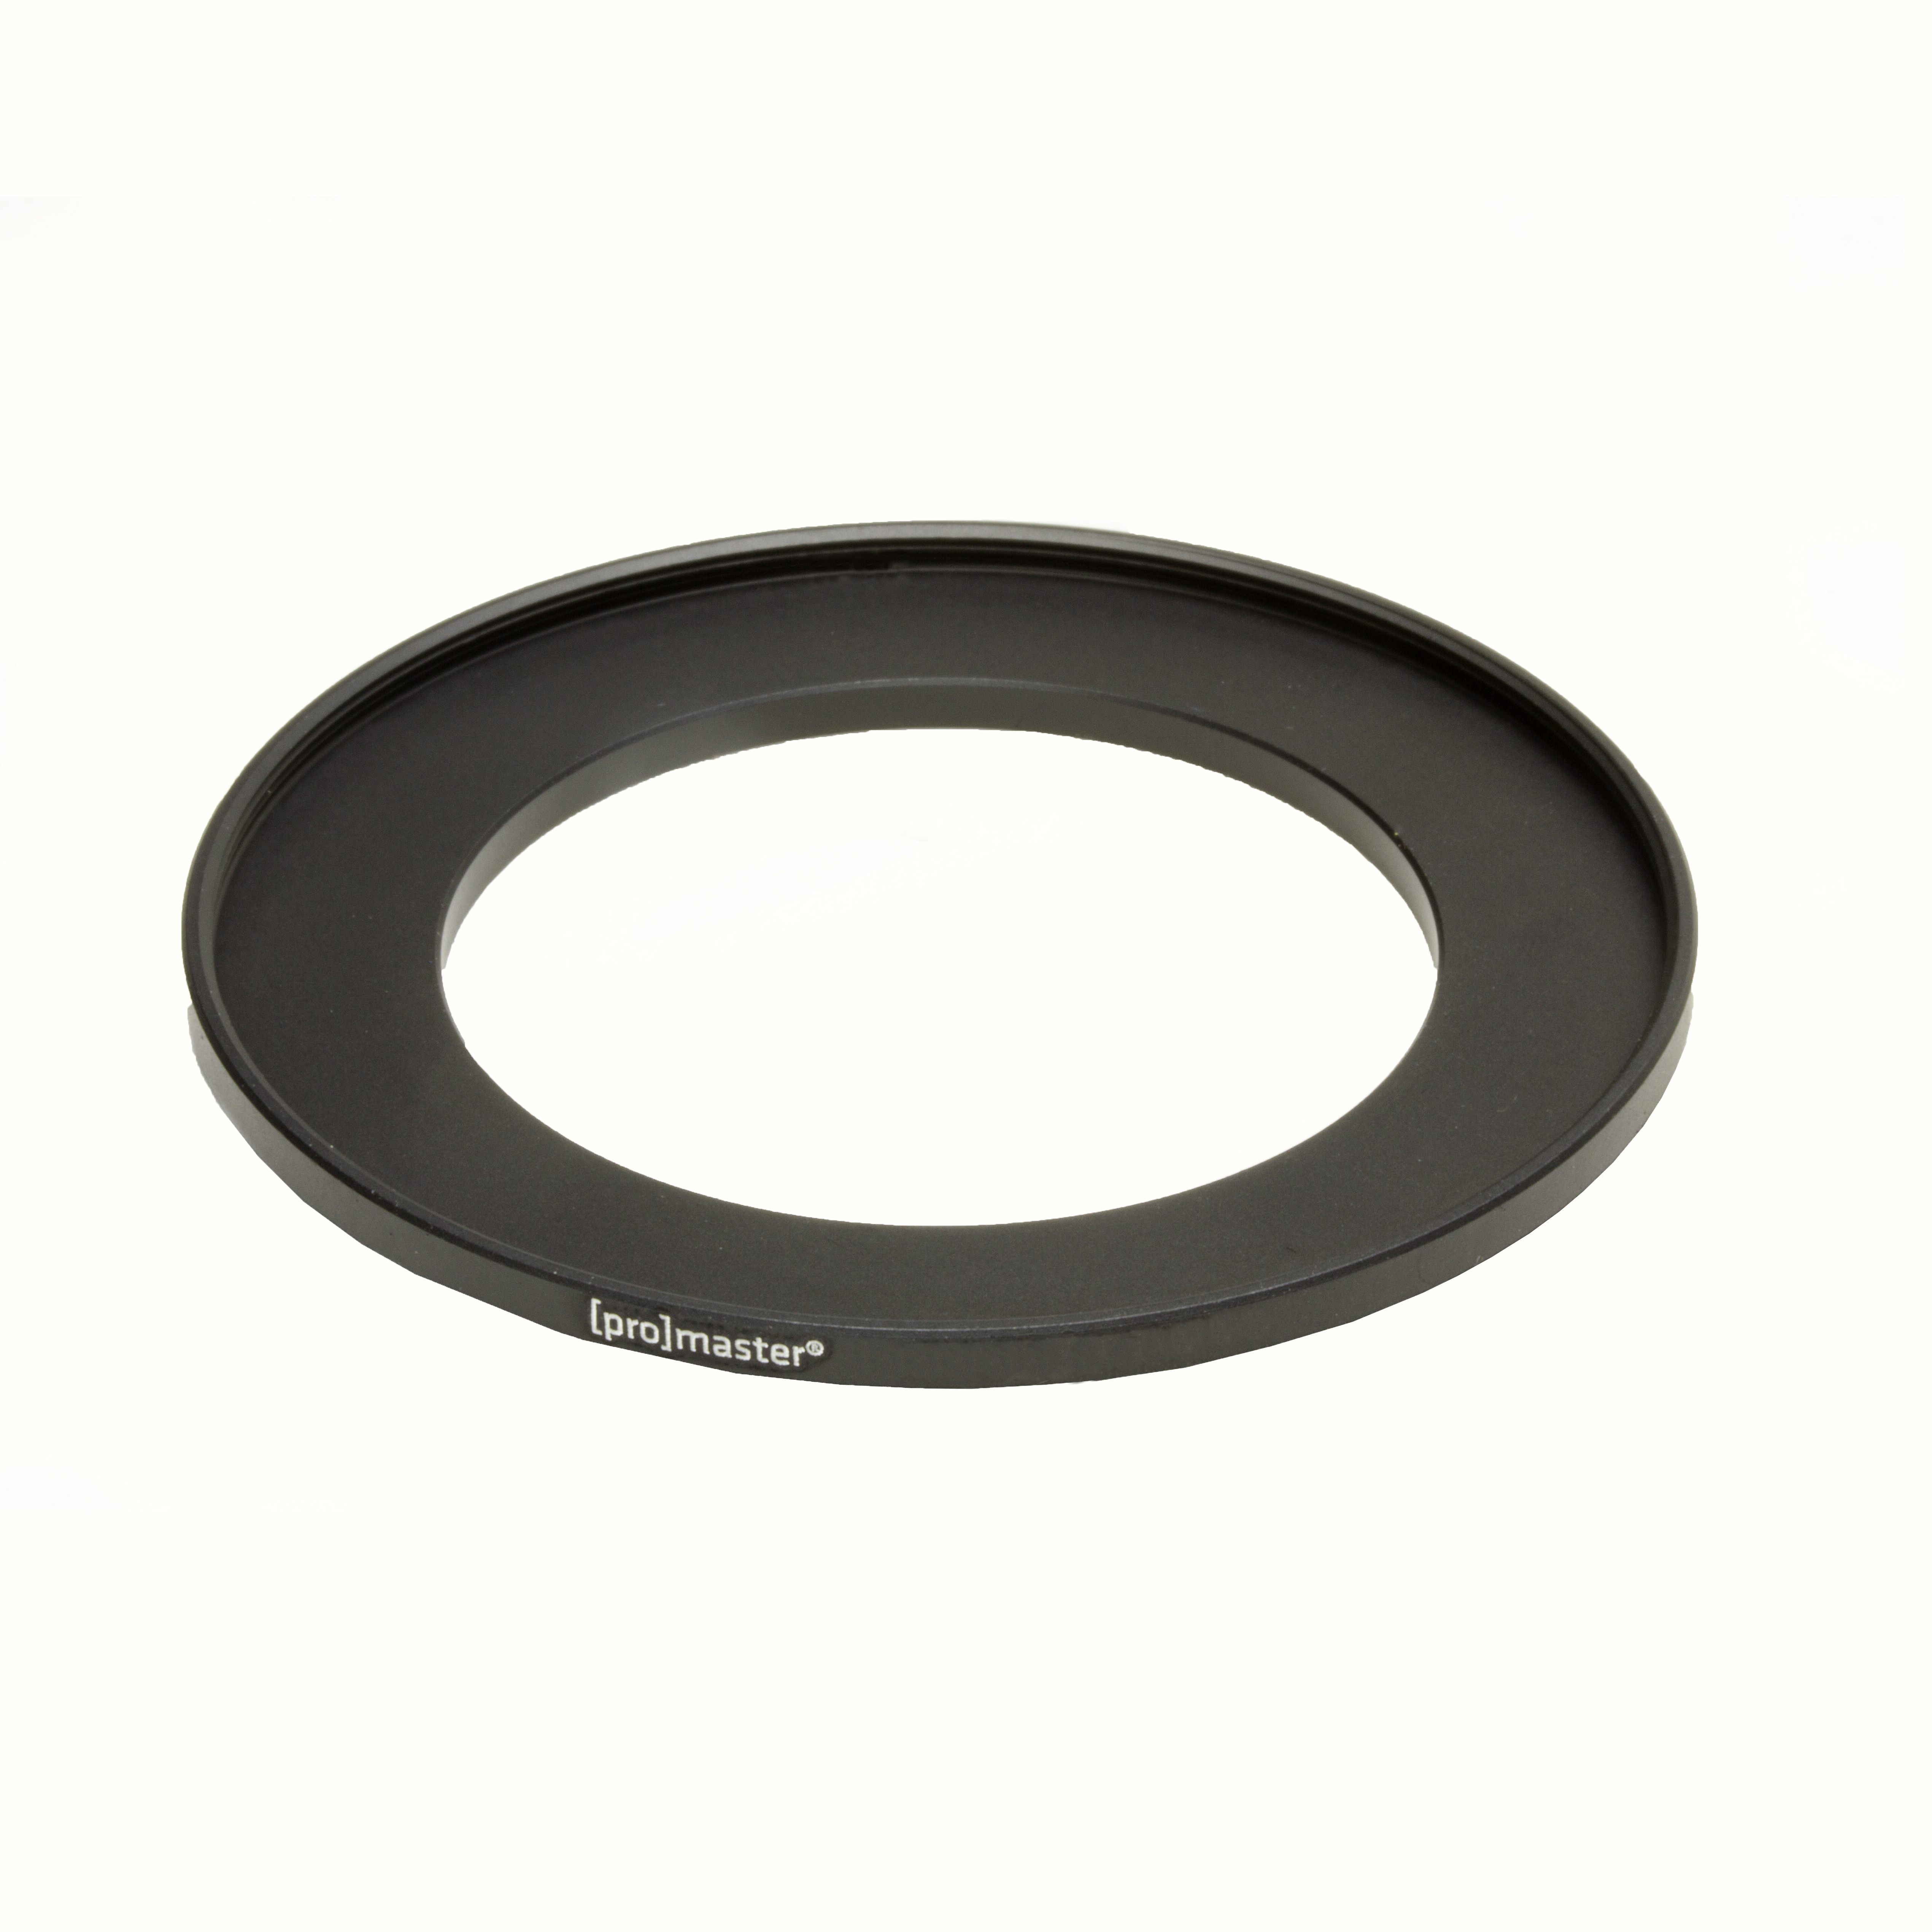 Promaster 4956 49-52mm Step-Up Ring